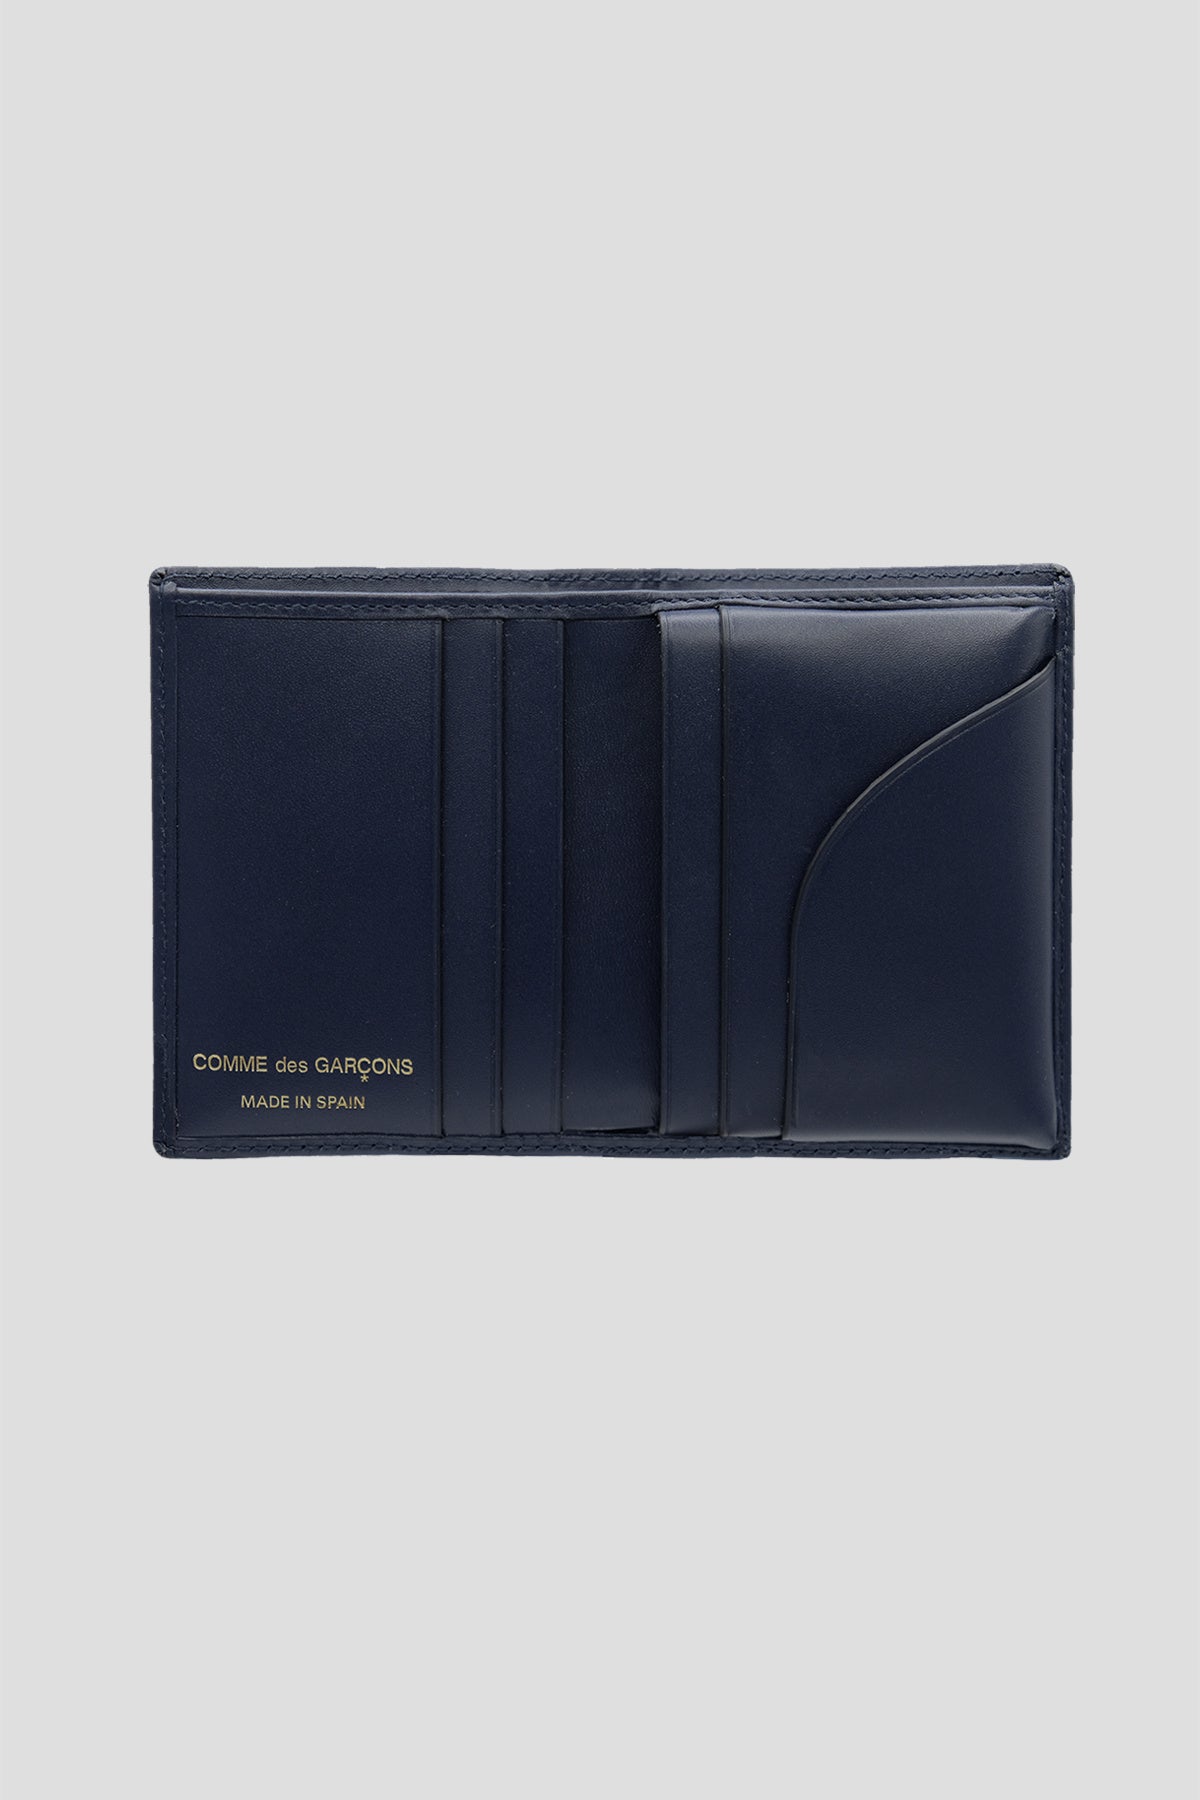 Classic Billfold Wallet SA0641 by Comme des Garçons in Navy